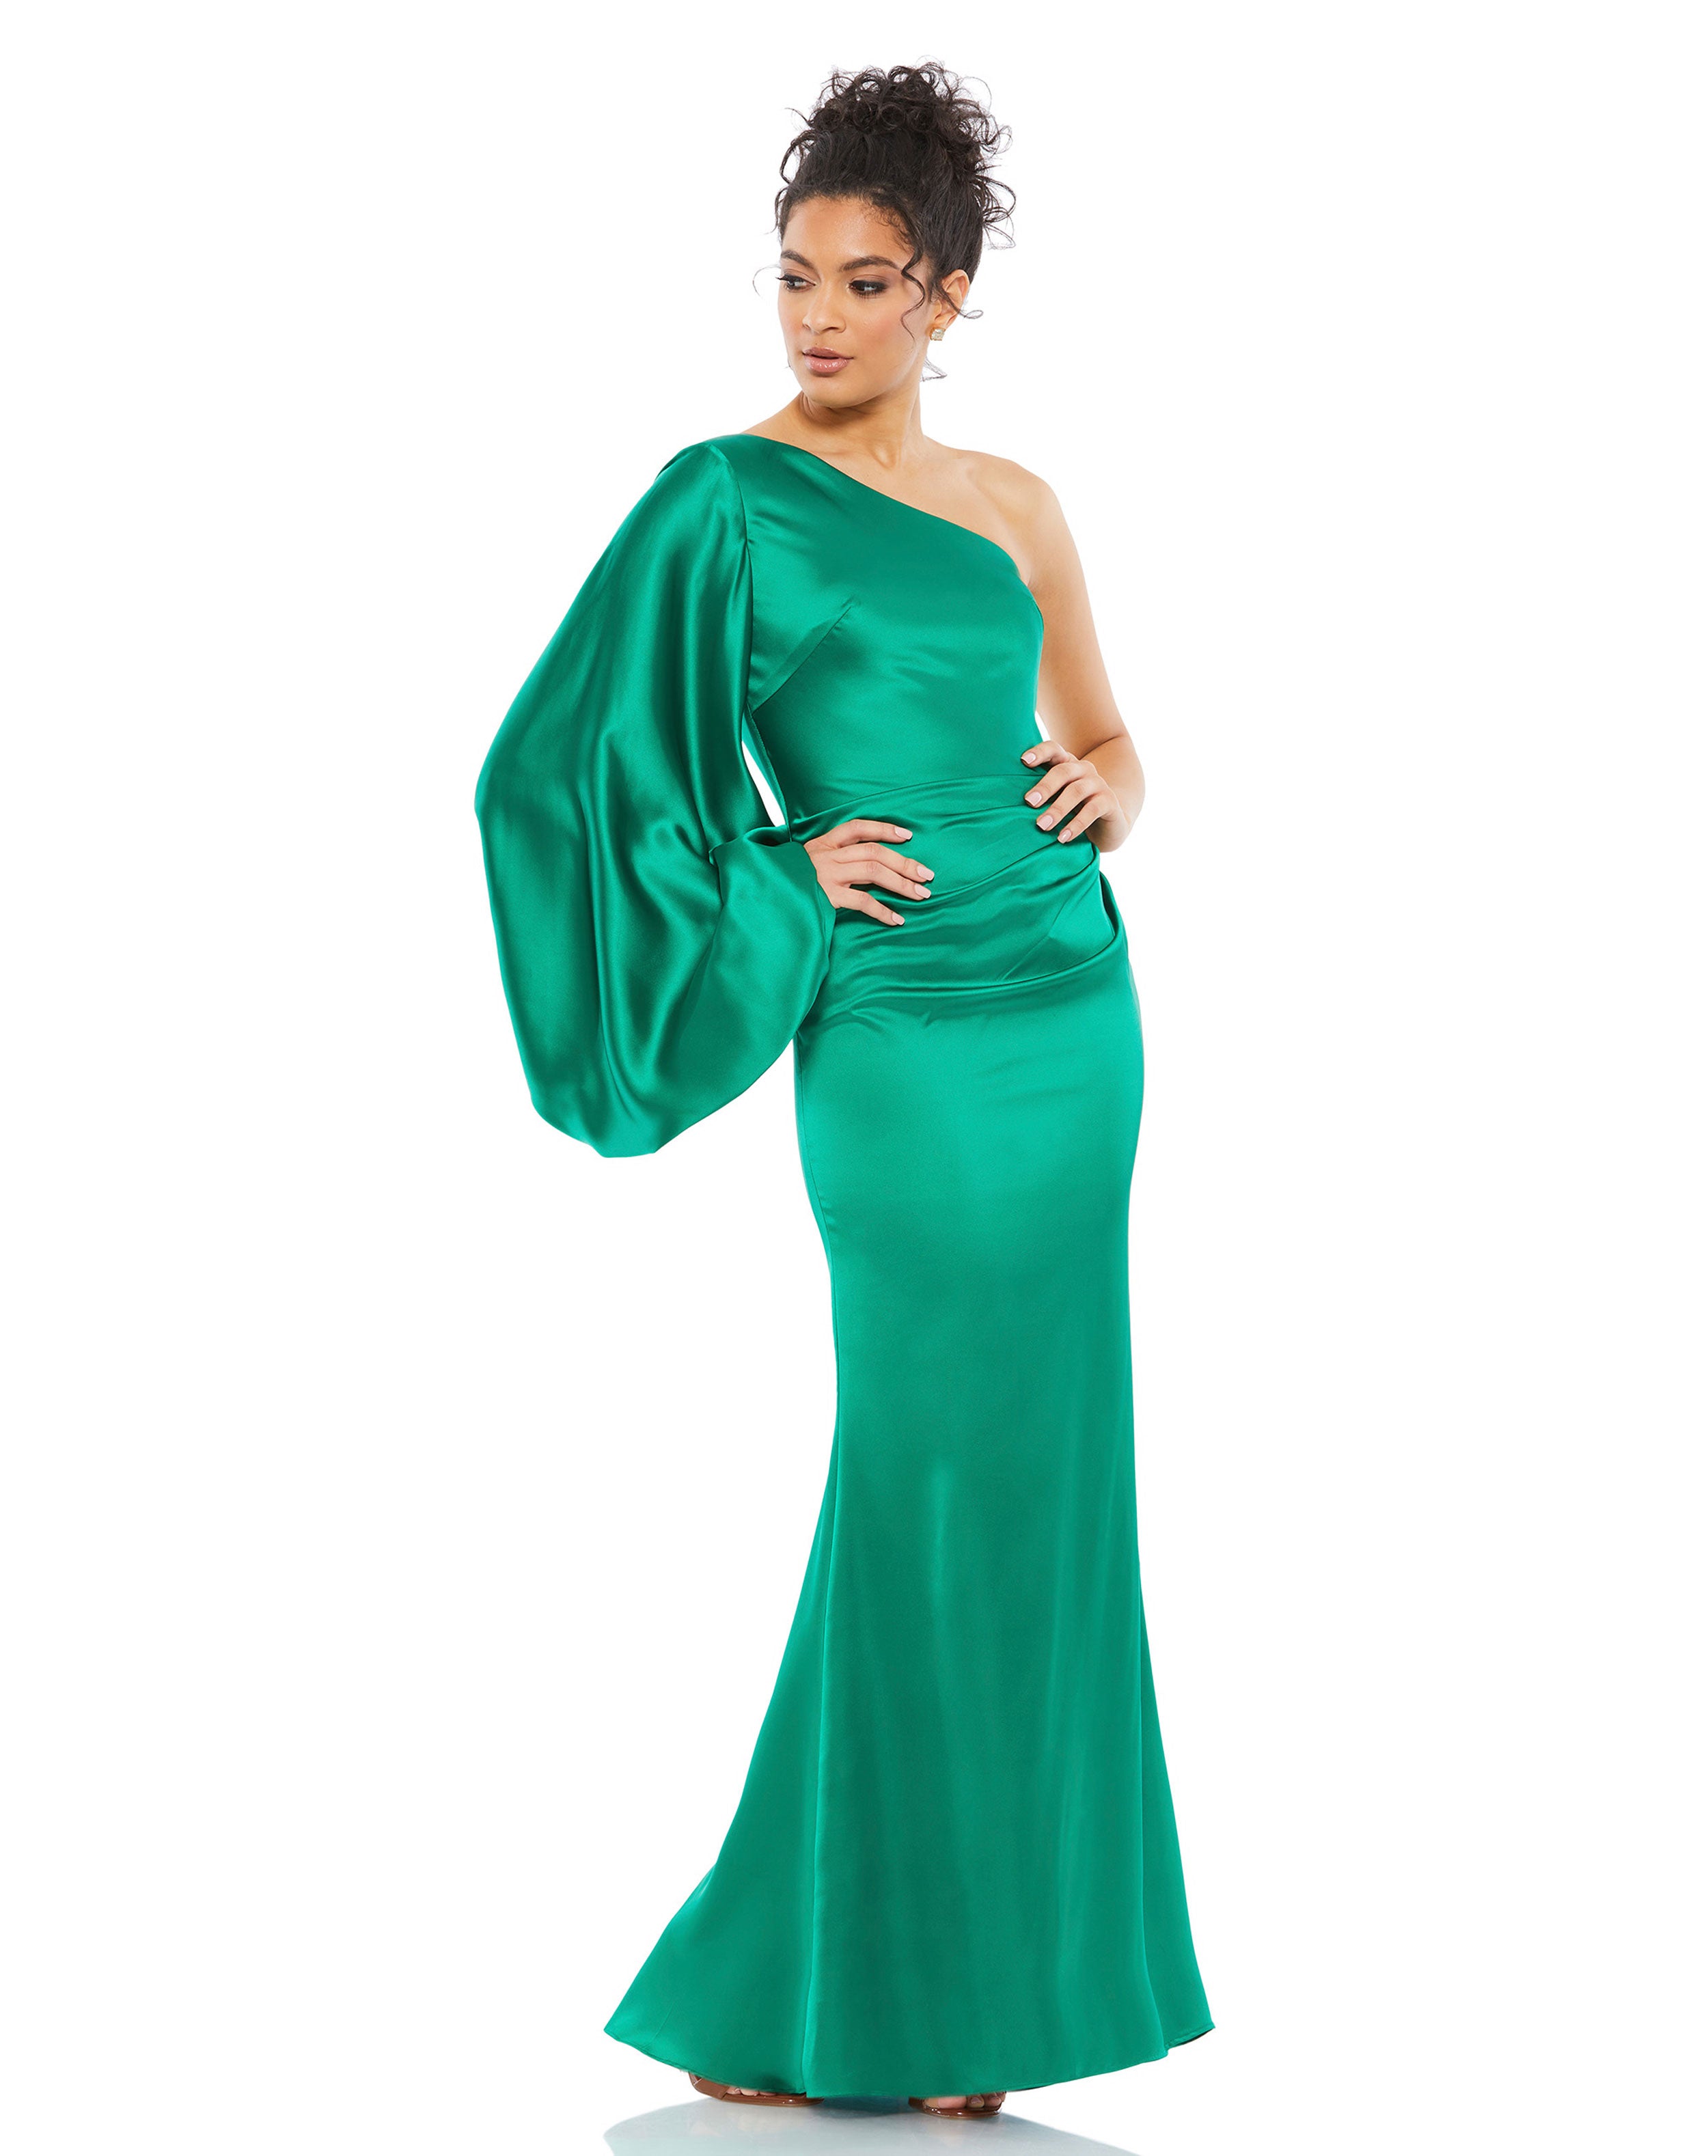 Satin Puff Sleeve Gown